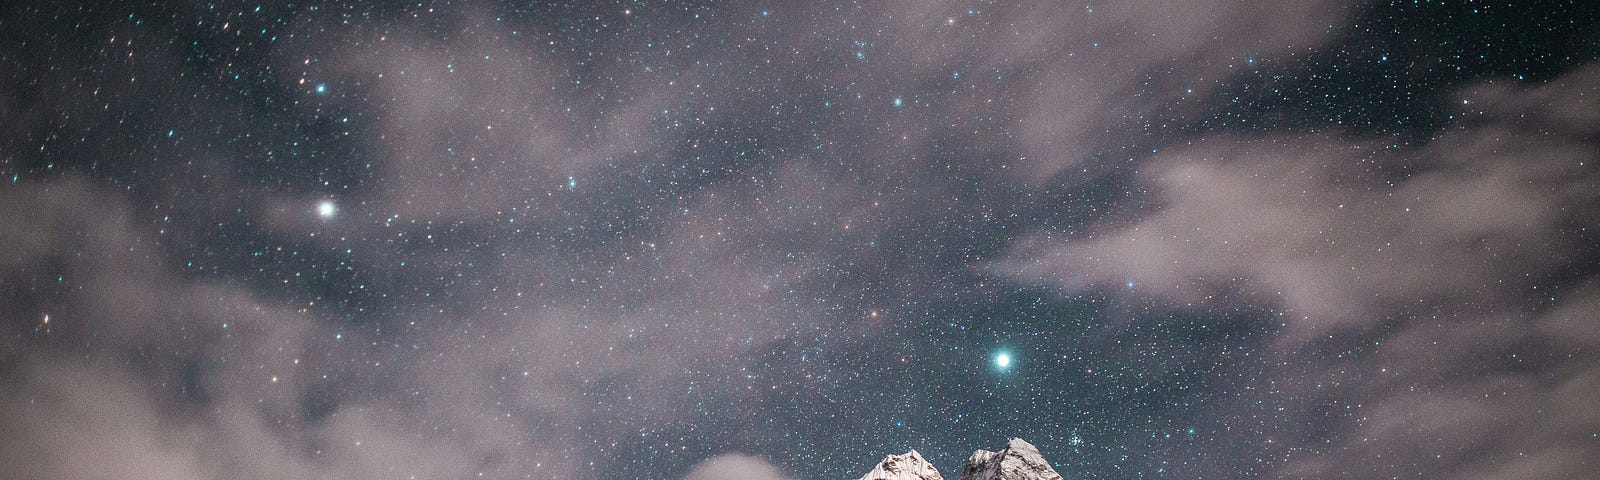 Night sky crowded with stars over a craggy and cloudy mountaintop